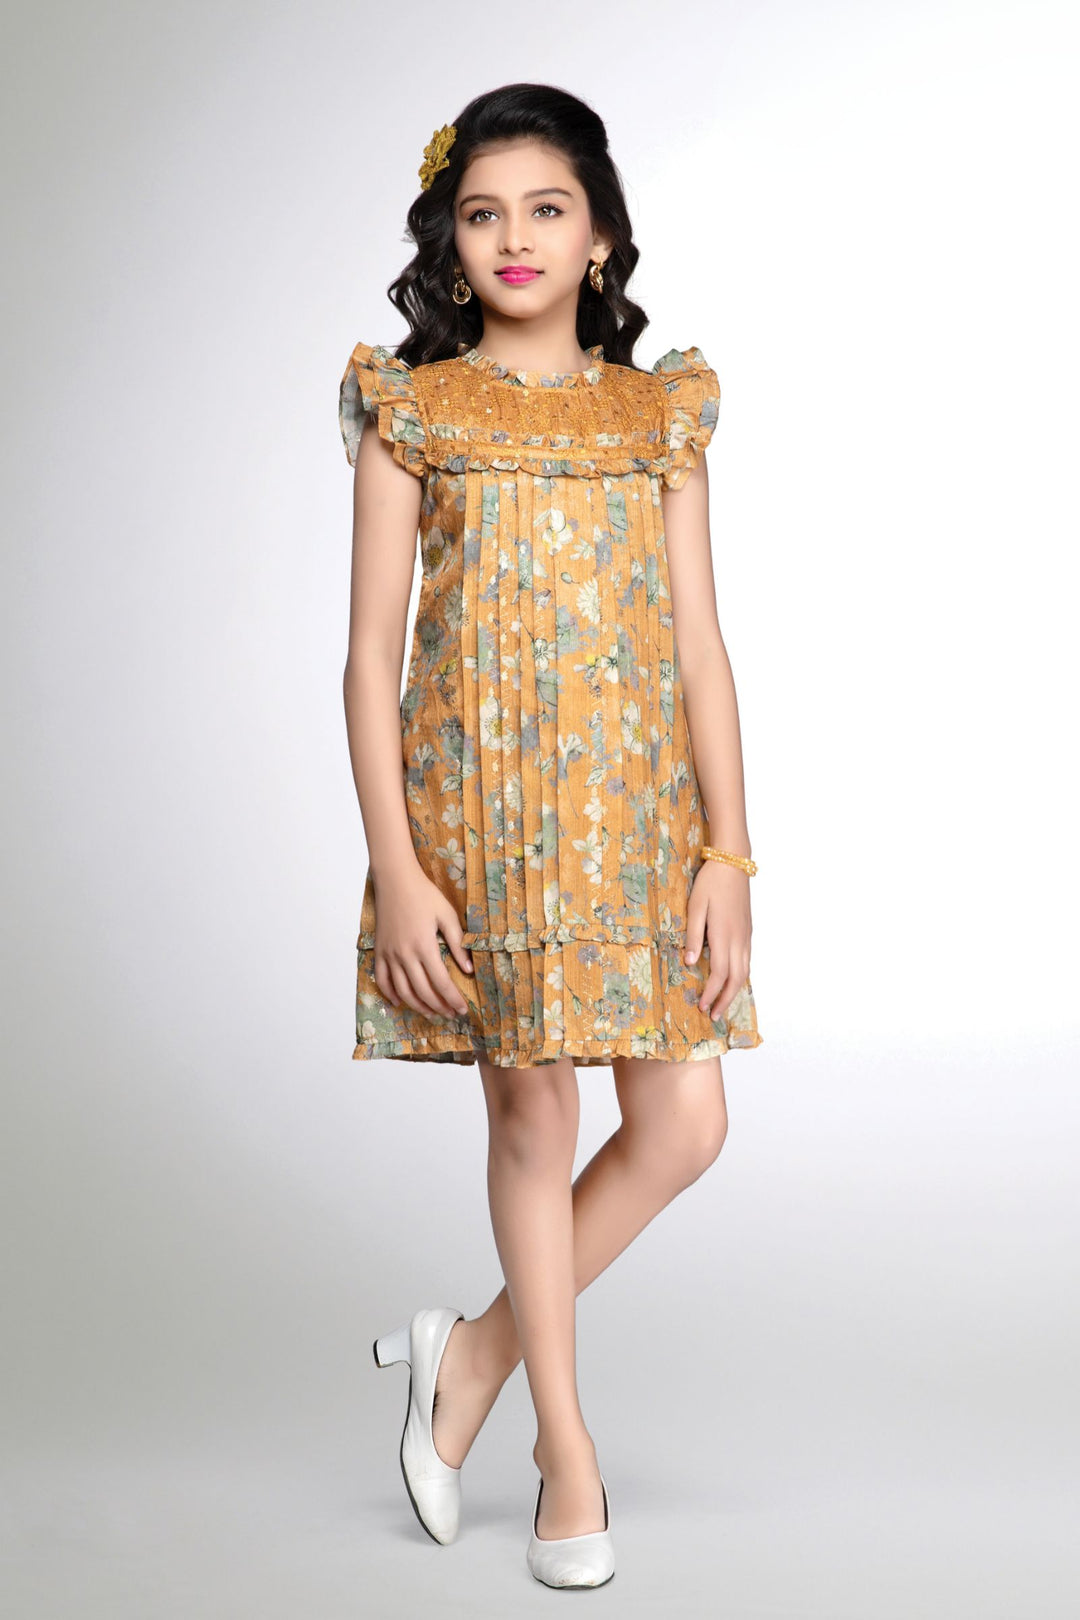 Mustard Zari and Thread work with Floral Print Knee Length Casual Frock for Girls